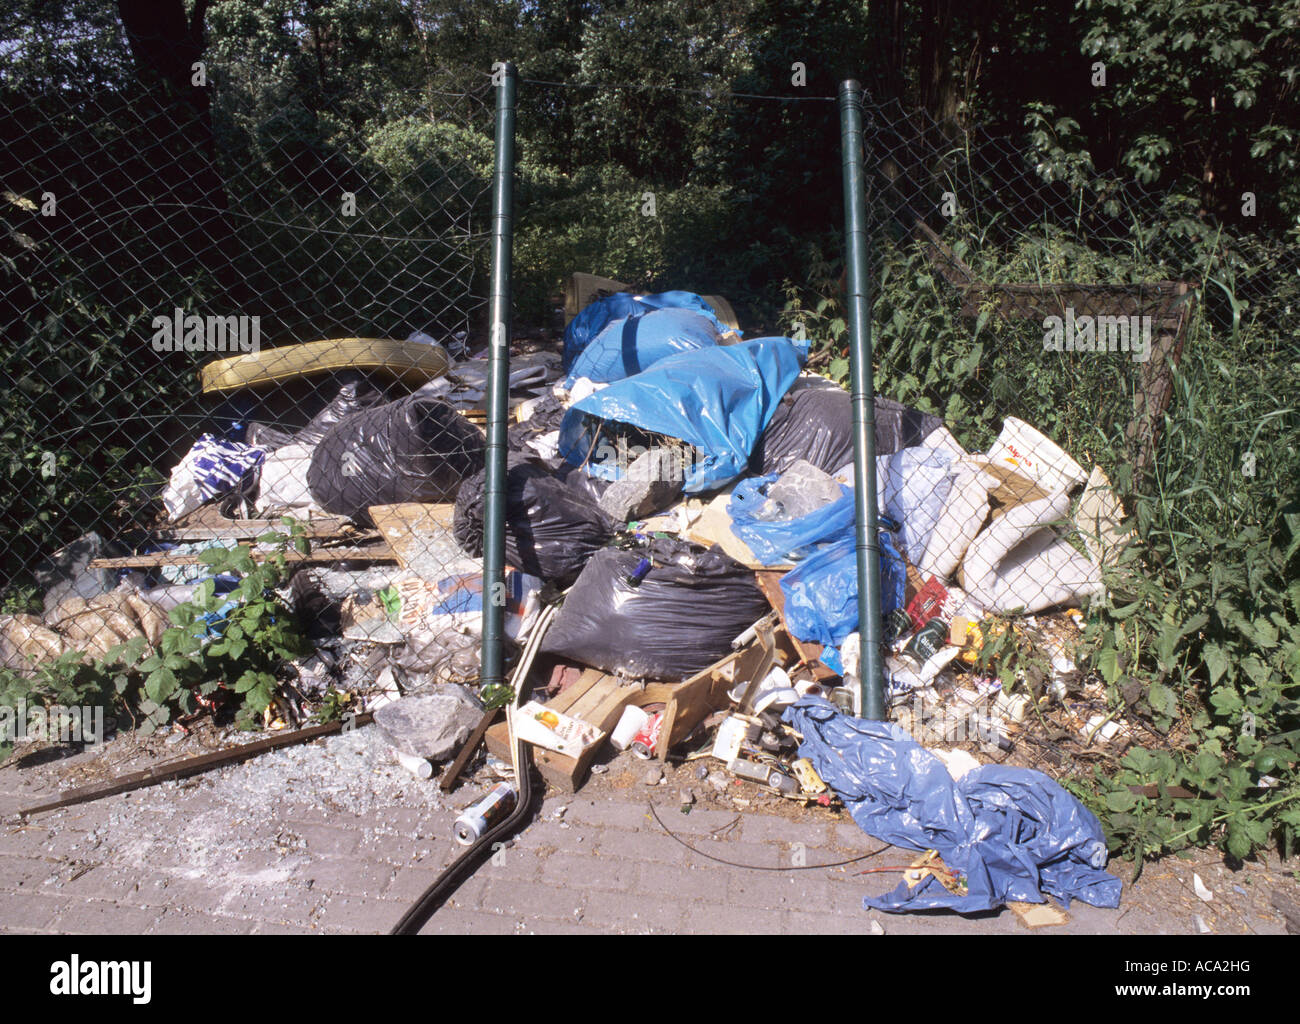 Illegal garbage dump, Germany Stock Photo